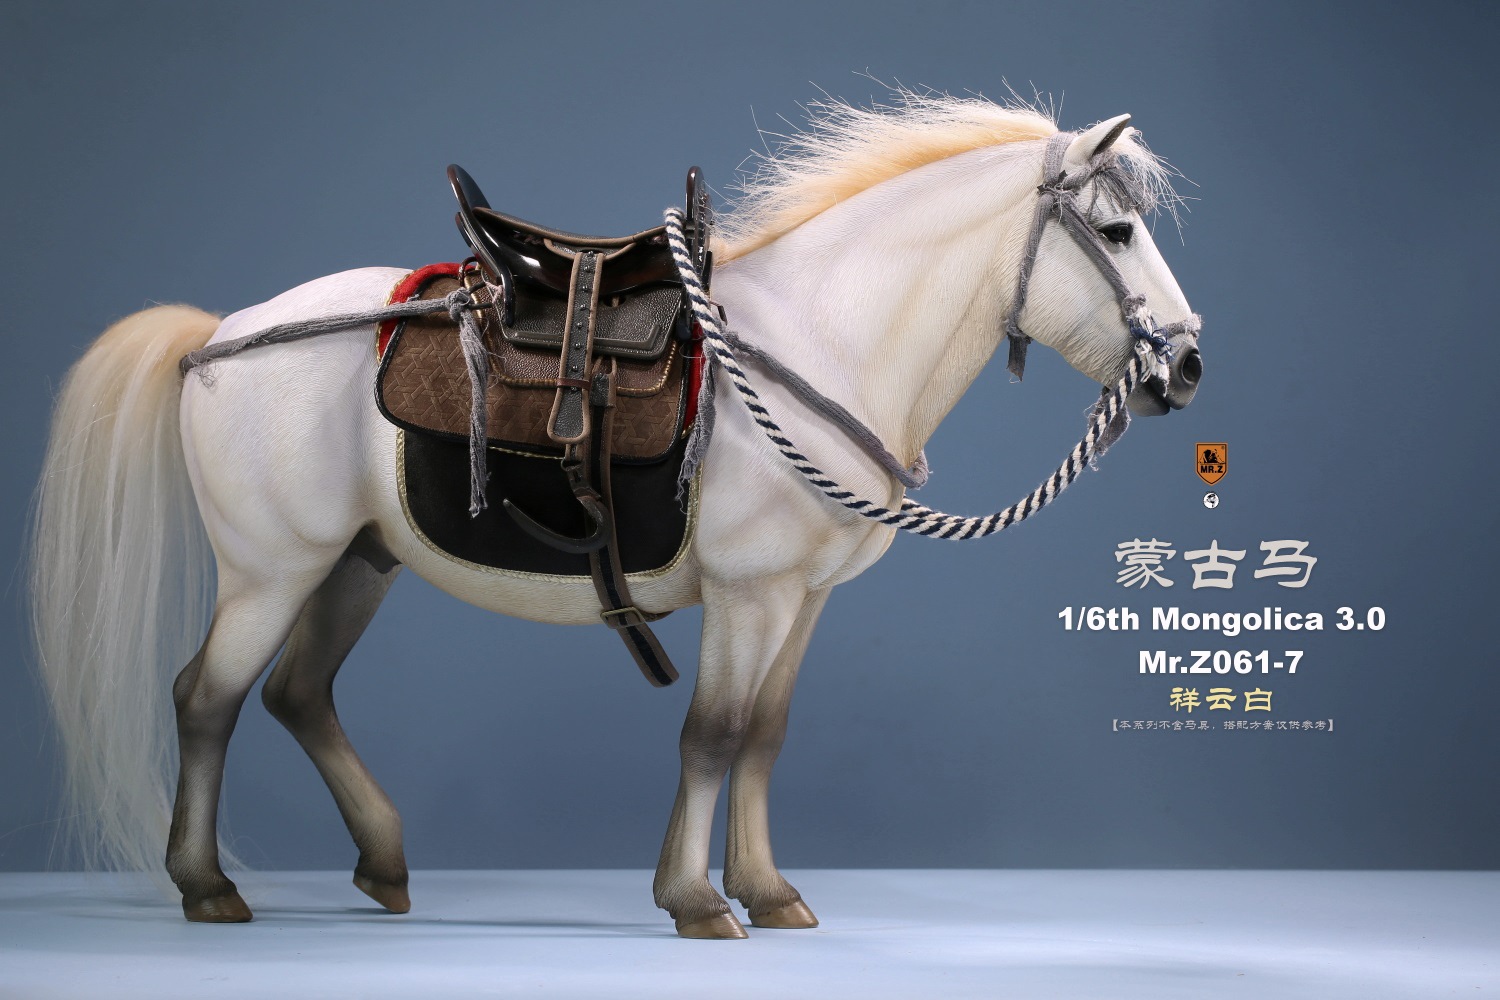 NEW PRODUCT: MR.Z - No. 61 - Mongolian horse set of 8 colors #Z061 & classical harness #DT001-S 6410